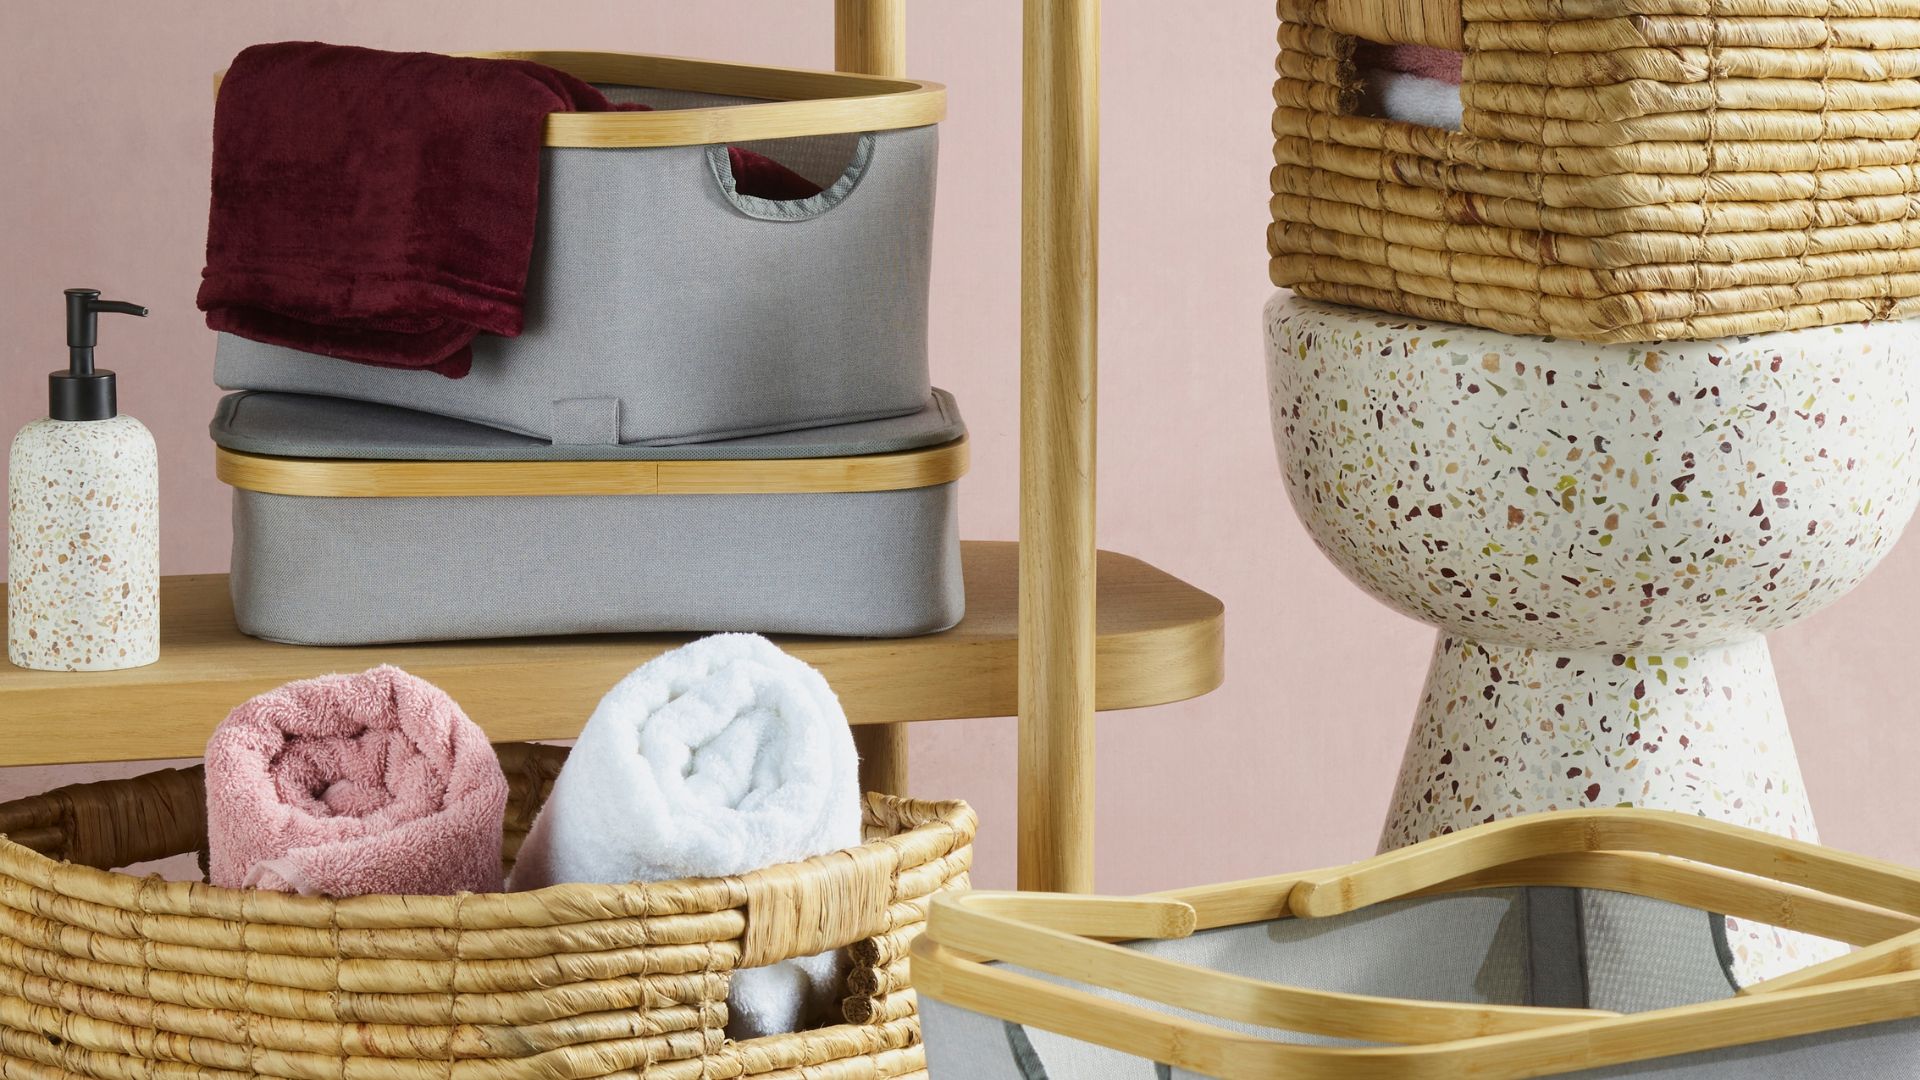 Linen storage baskets, buckets and boxes